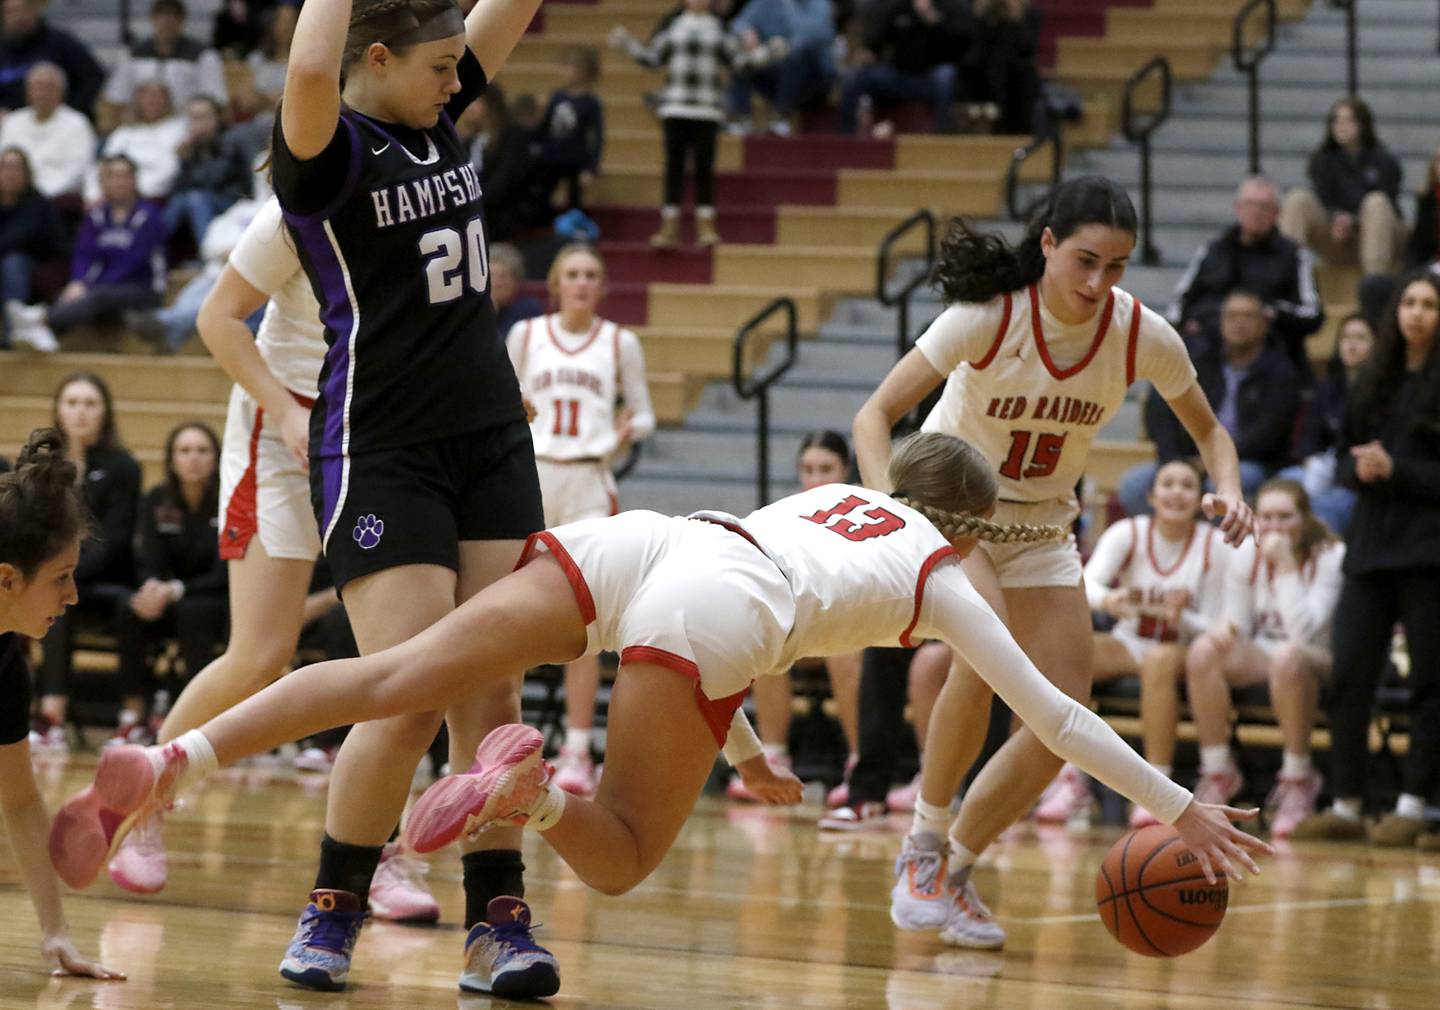 Huntley's Morgan McCaughn dives as she tries to save the ball from going out of bounds in front of Hampshire's Chloe Van Horn and Huntley's Jessie Ozzauto during a Fox Valley Conference girls basketball game Monday, Jan. 30, 2023, at Huntley High School.